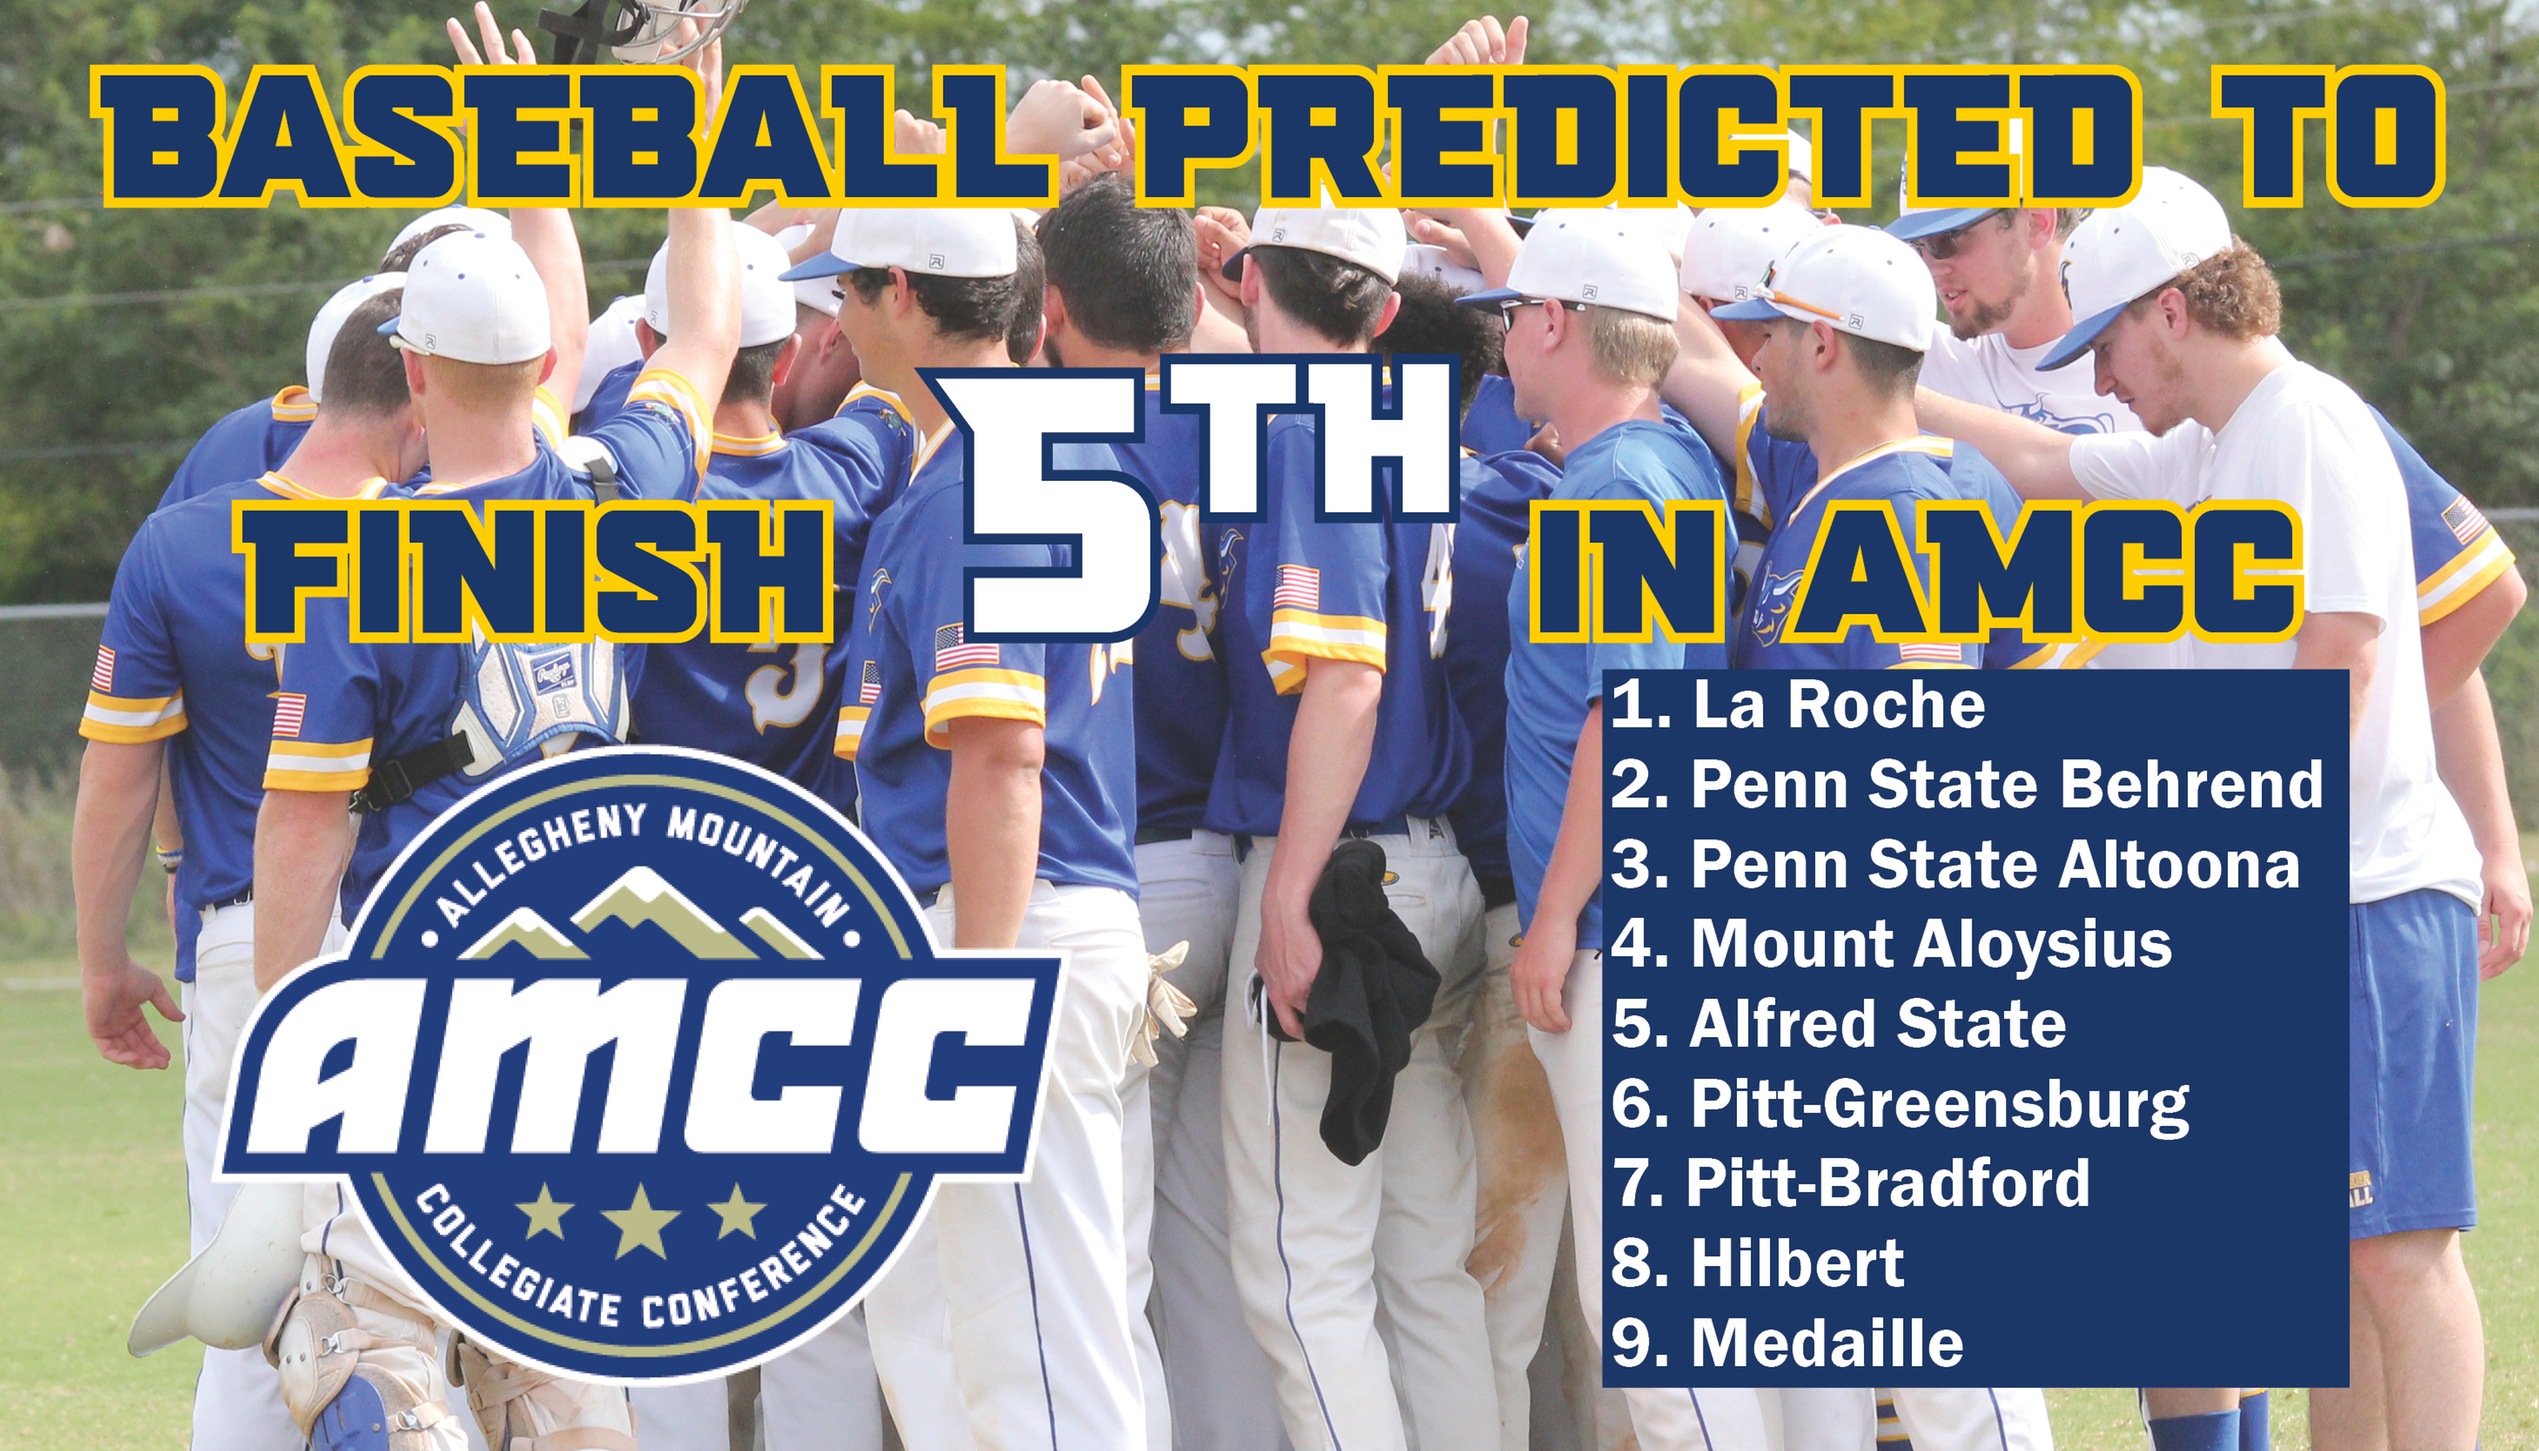 Baseball team postgame huddle - story highlights team being predicted 5th in AMCC preseason poll